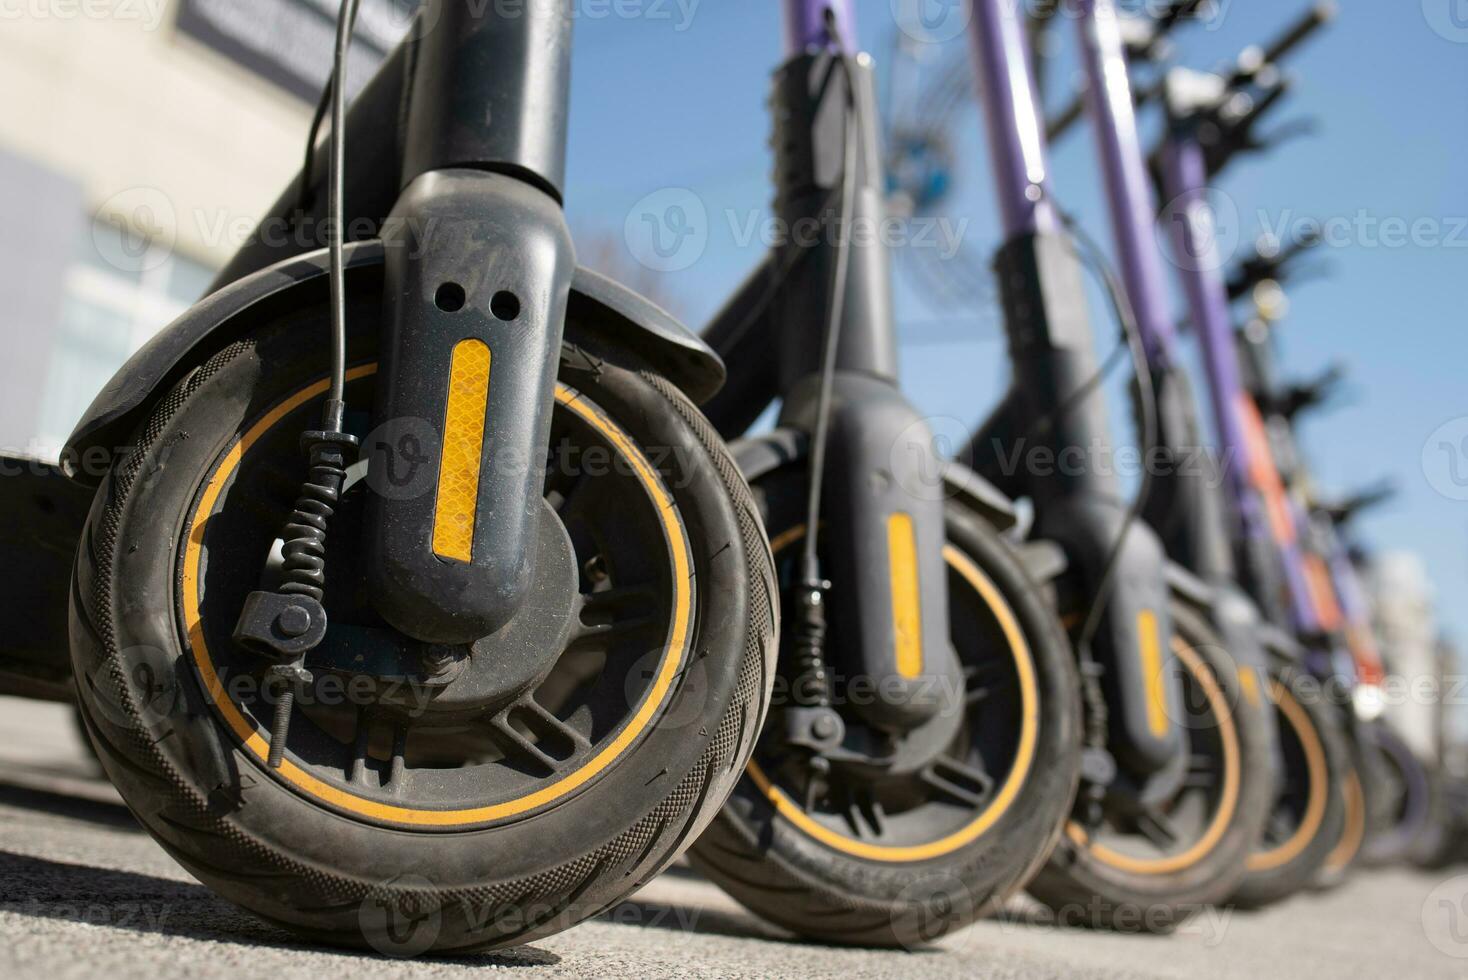 Electric scooters are parked in the city center. Modern public mobile transport photo